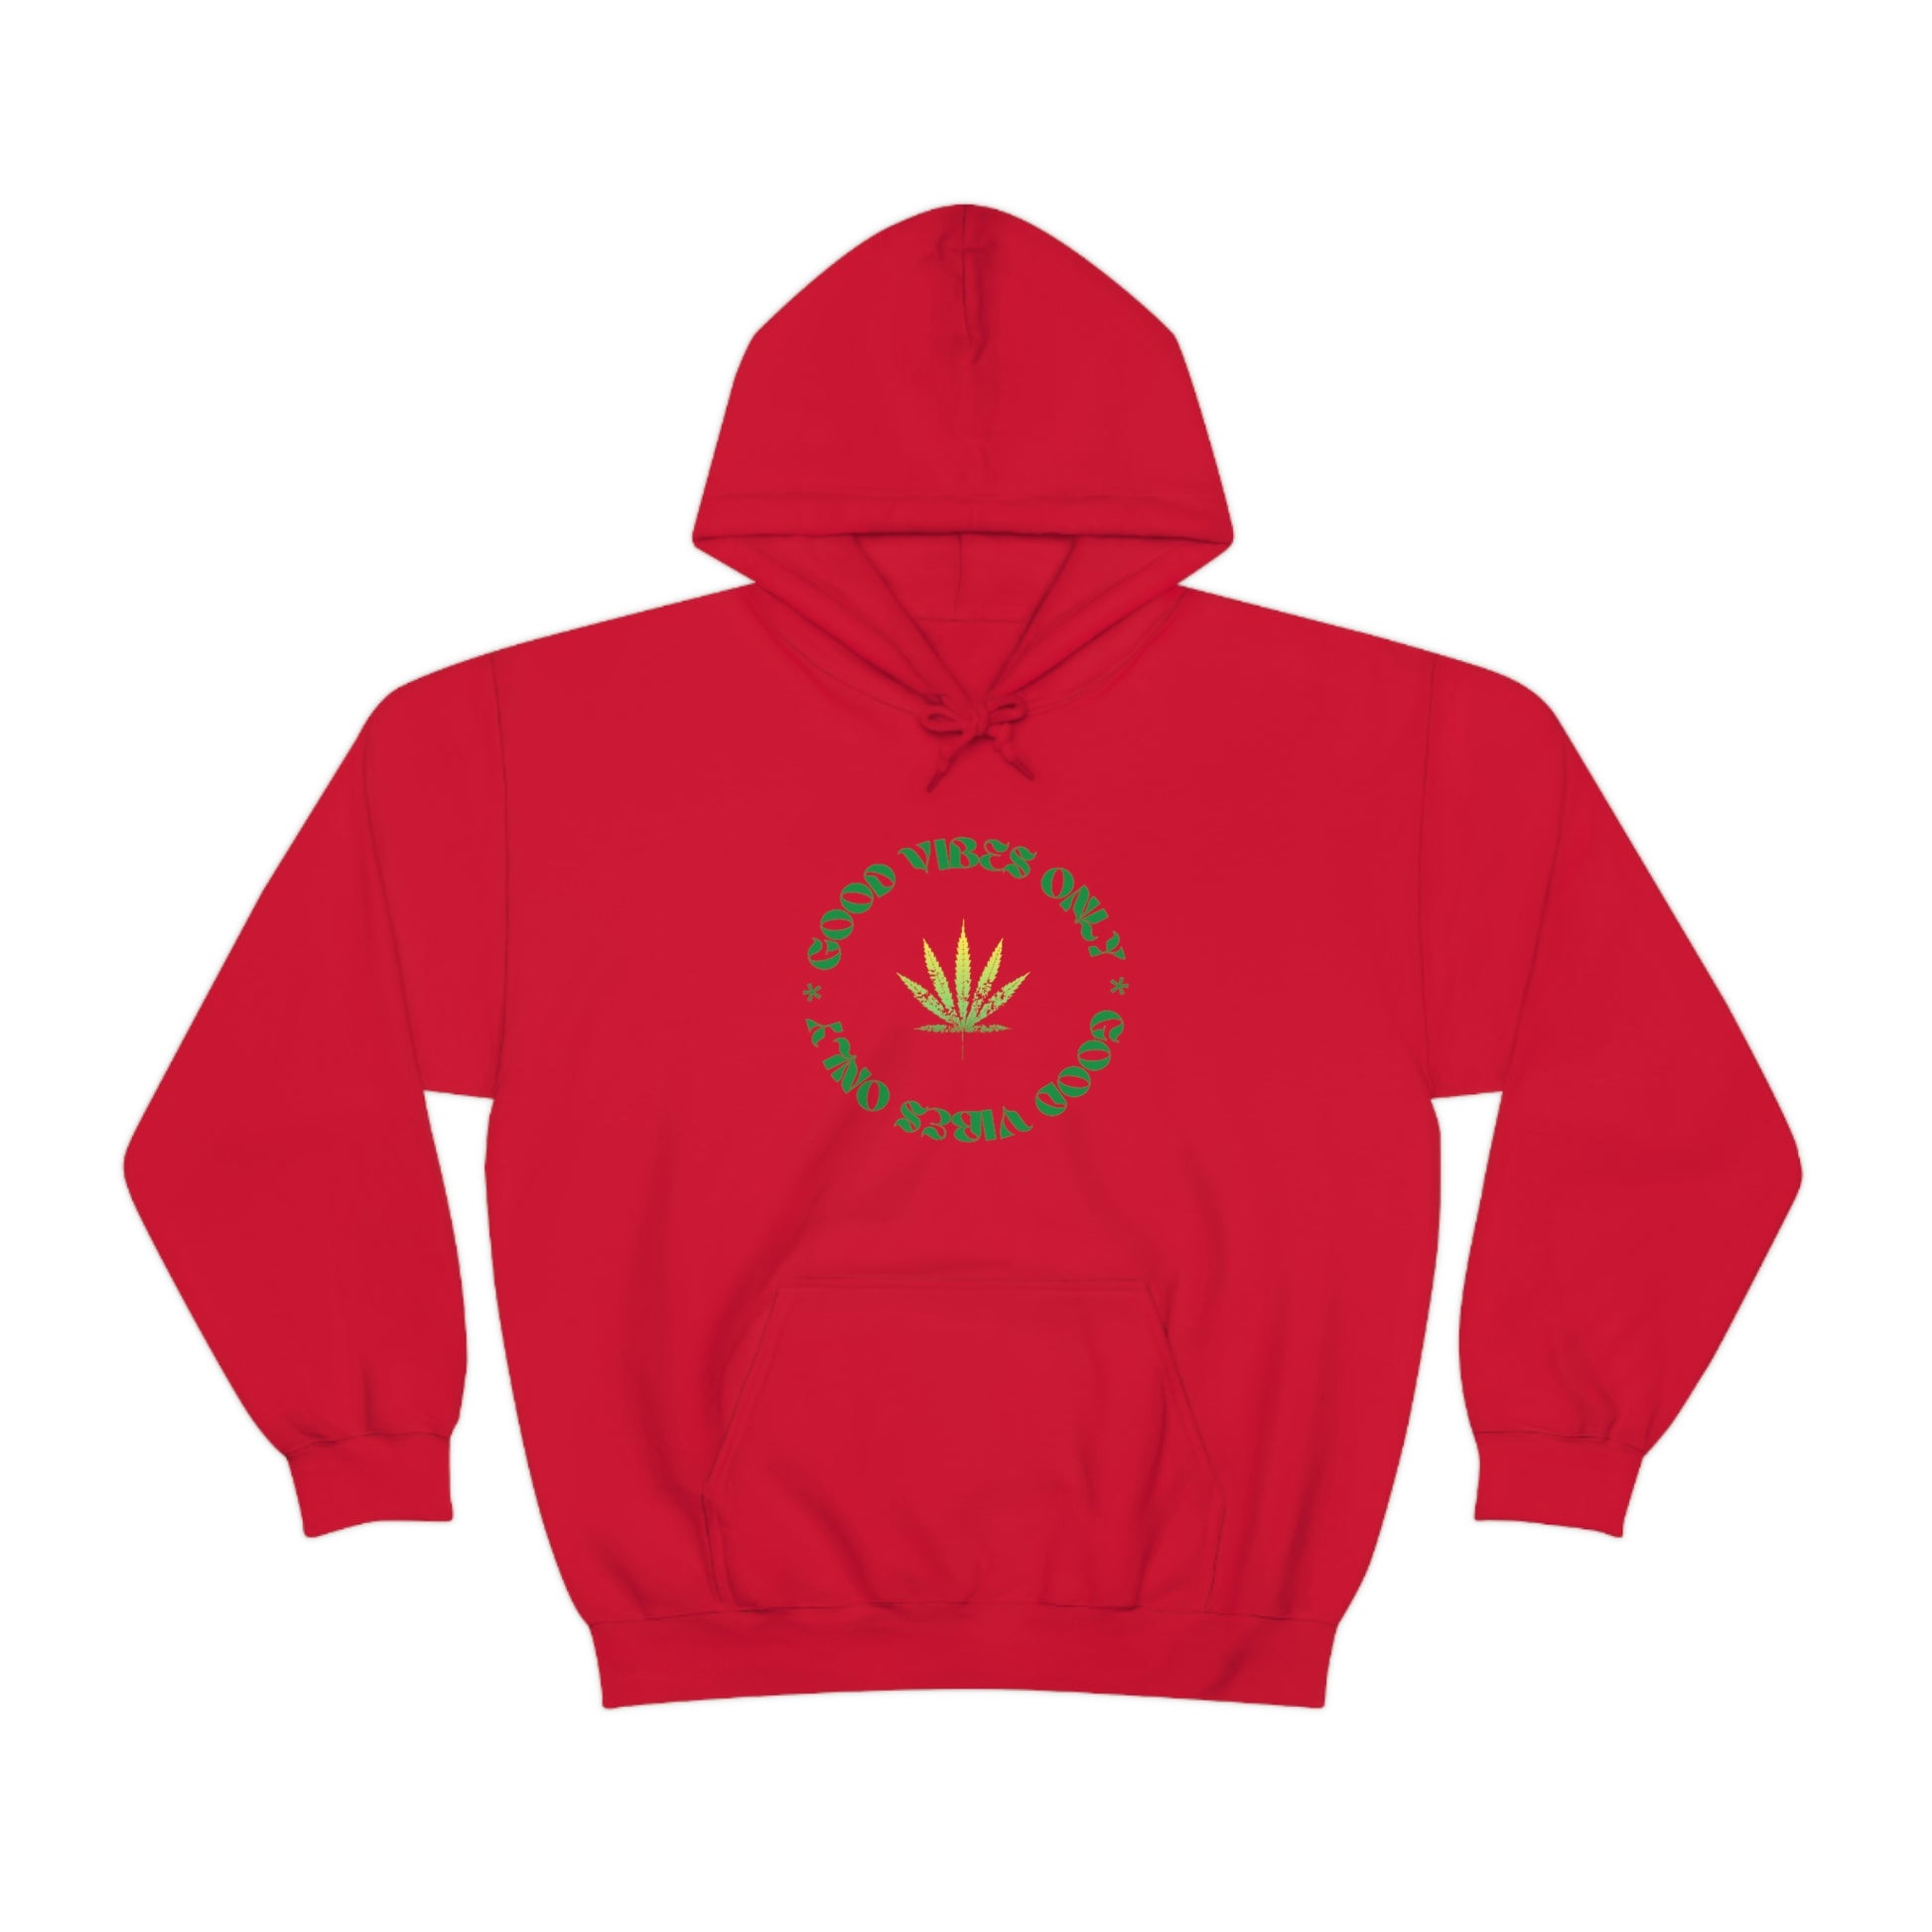 A red Good Vibes Only Weed Sweater.